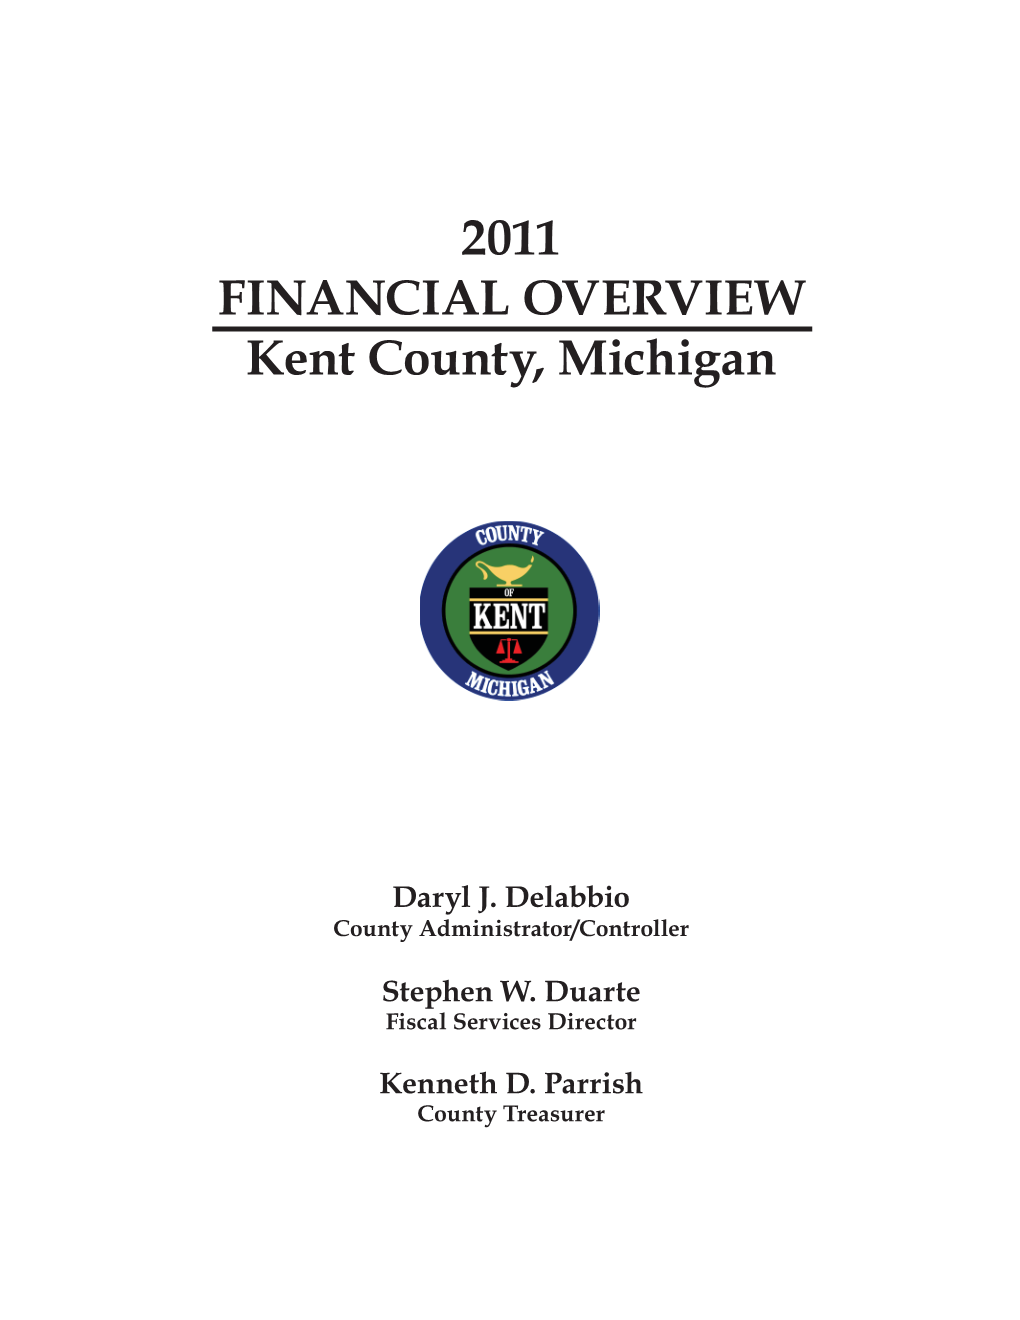 2011 Kent County Financial Overview